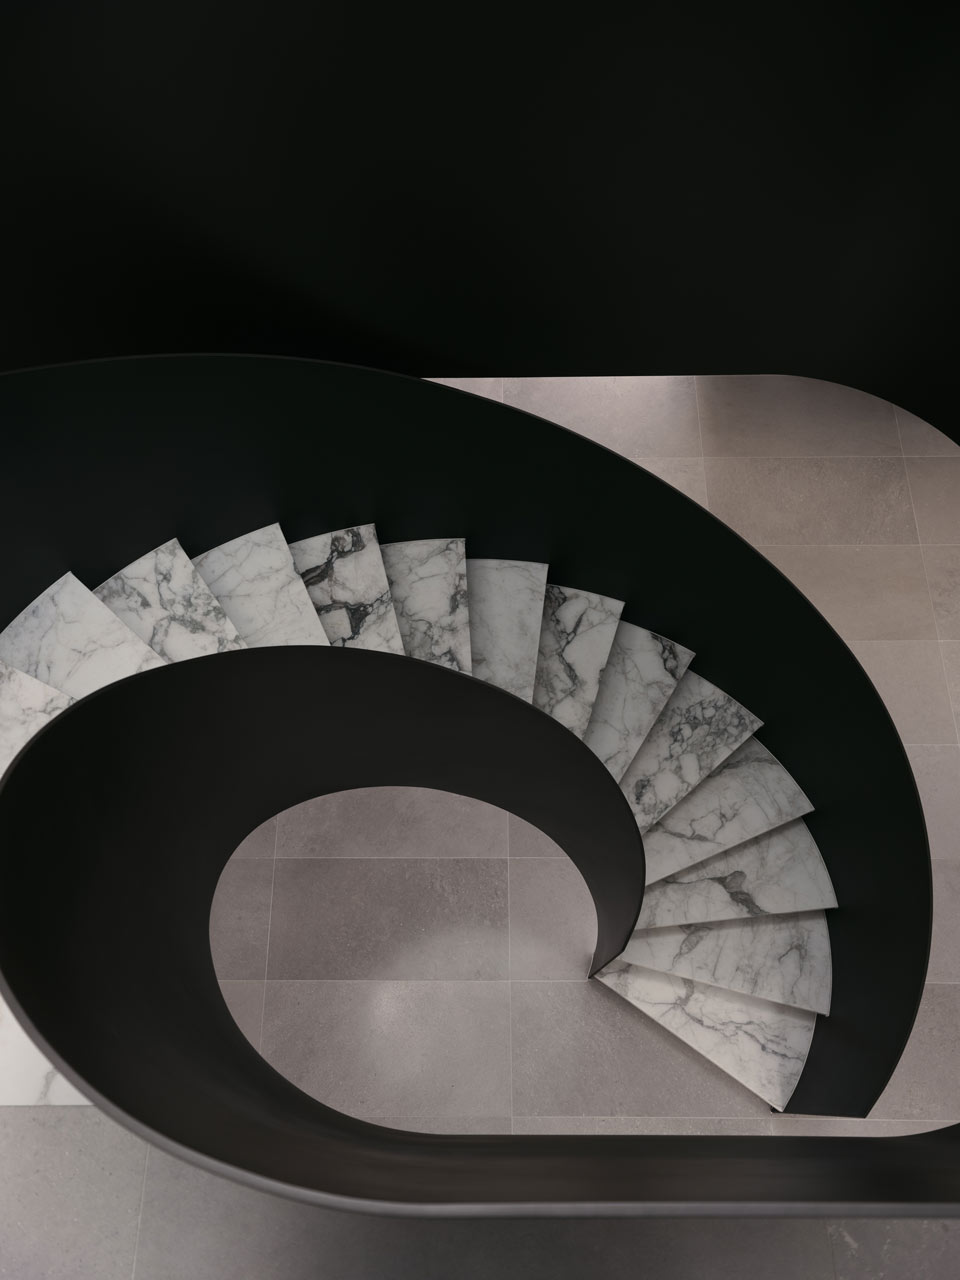 Overhead view of a striking black spiral staircase with white marble steps, creating a dramatic contrast against the minimalist grey tiled floor.